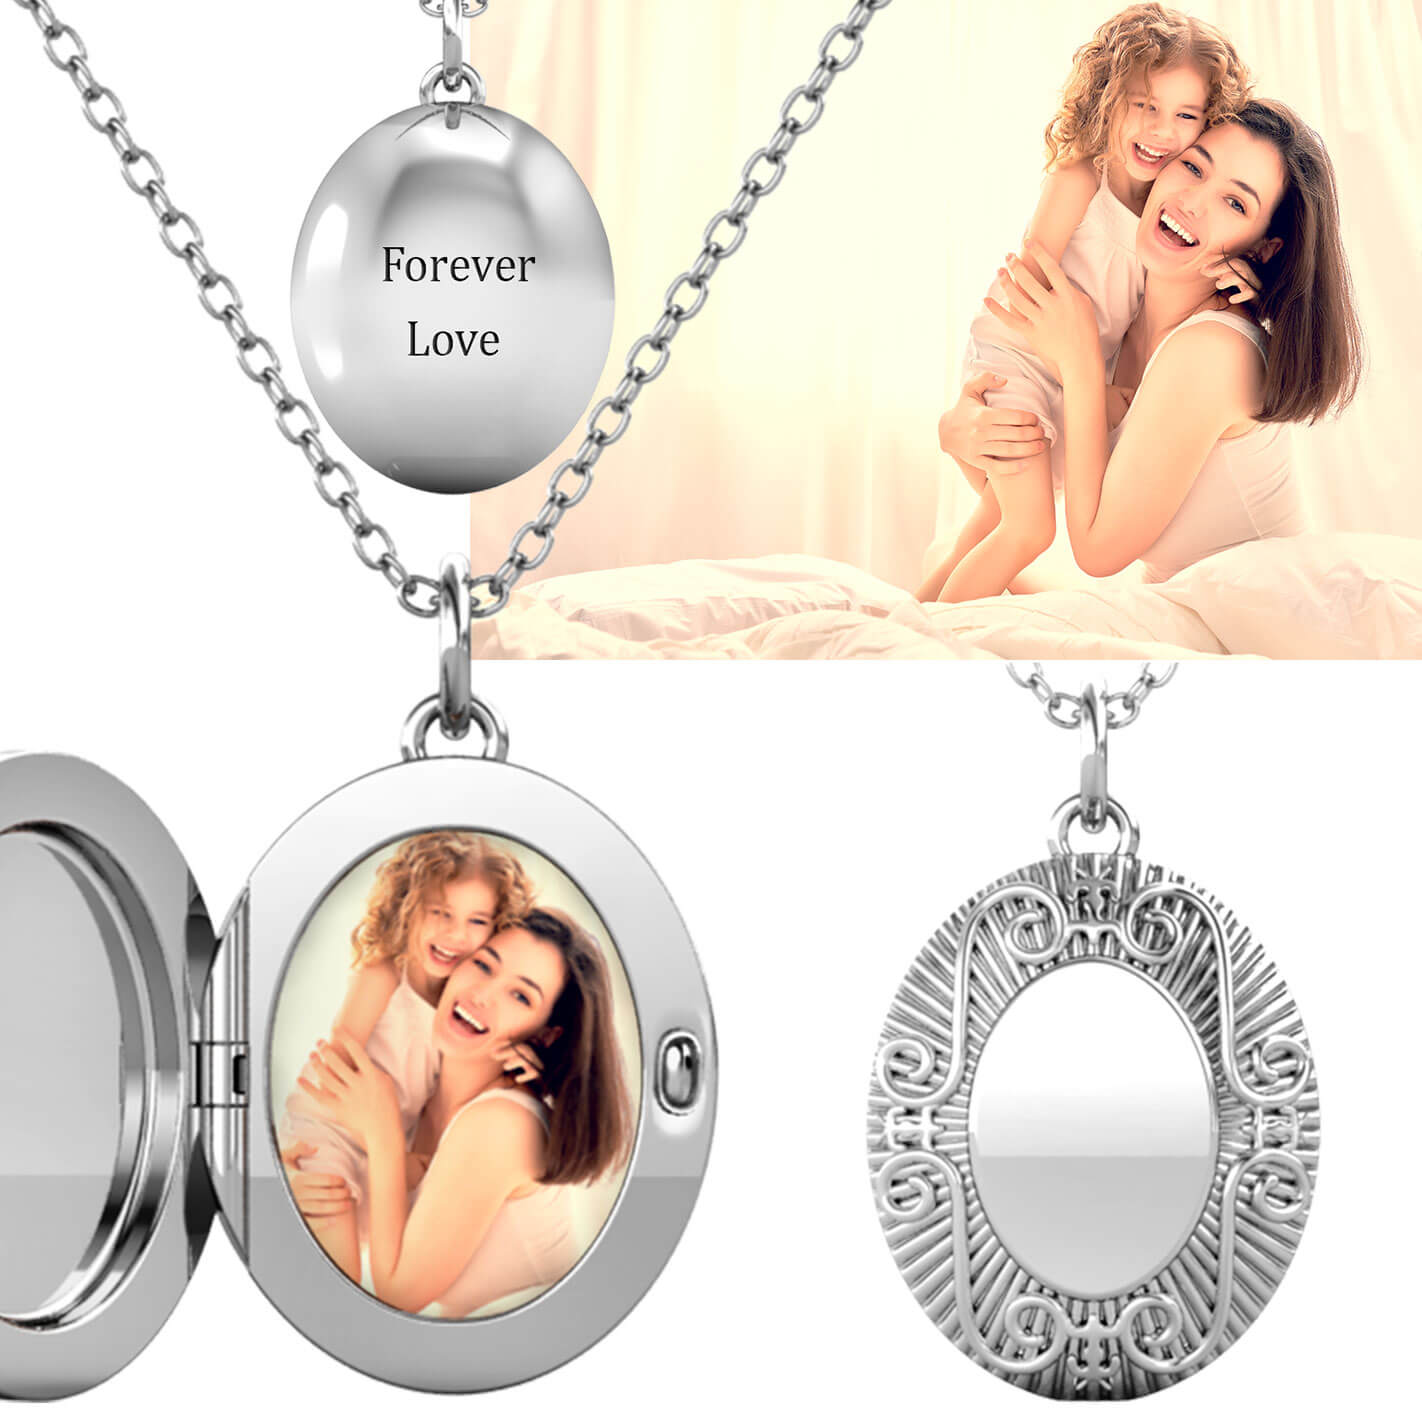 Personalize Your Photo & Message Engraved Necklace – Blinglane